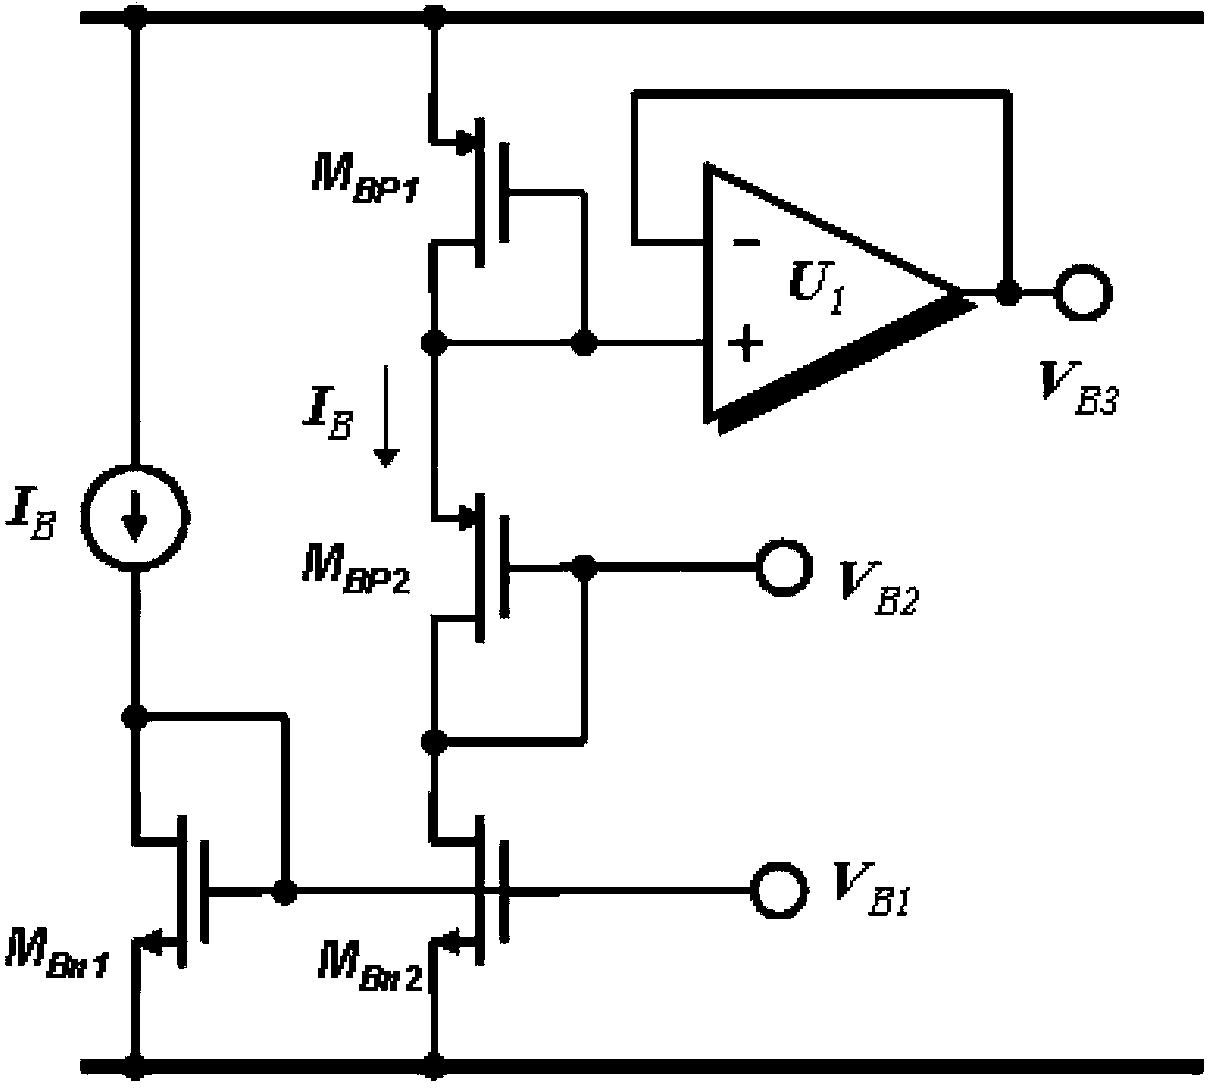 Photovoltaic detector read-out unit circuit applying inverted voltage follower